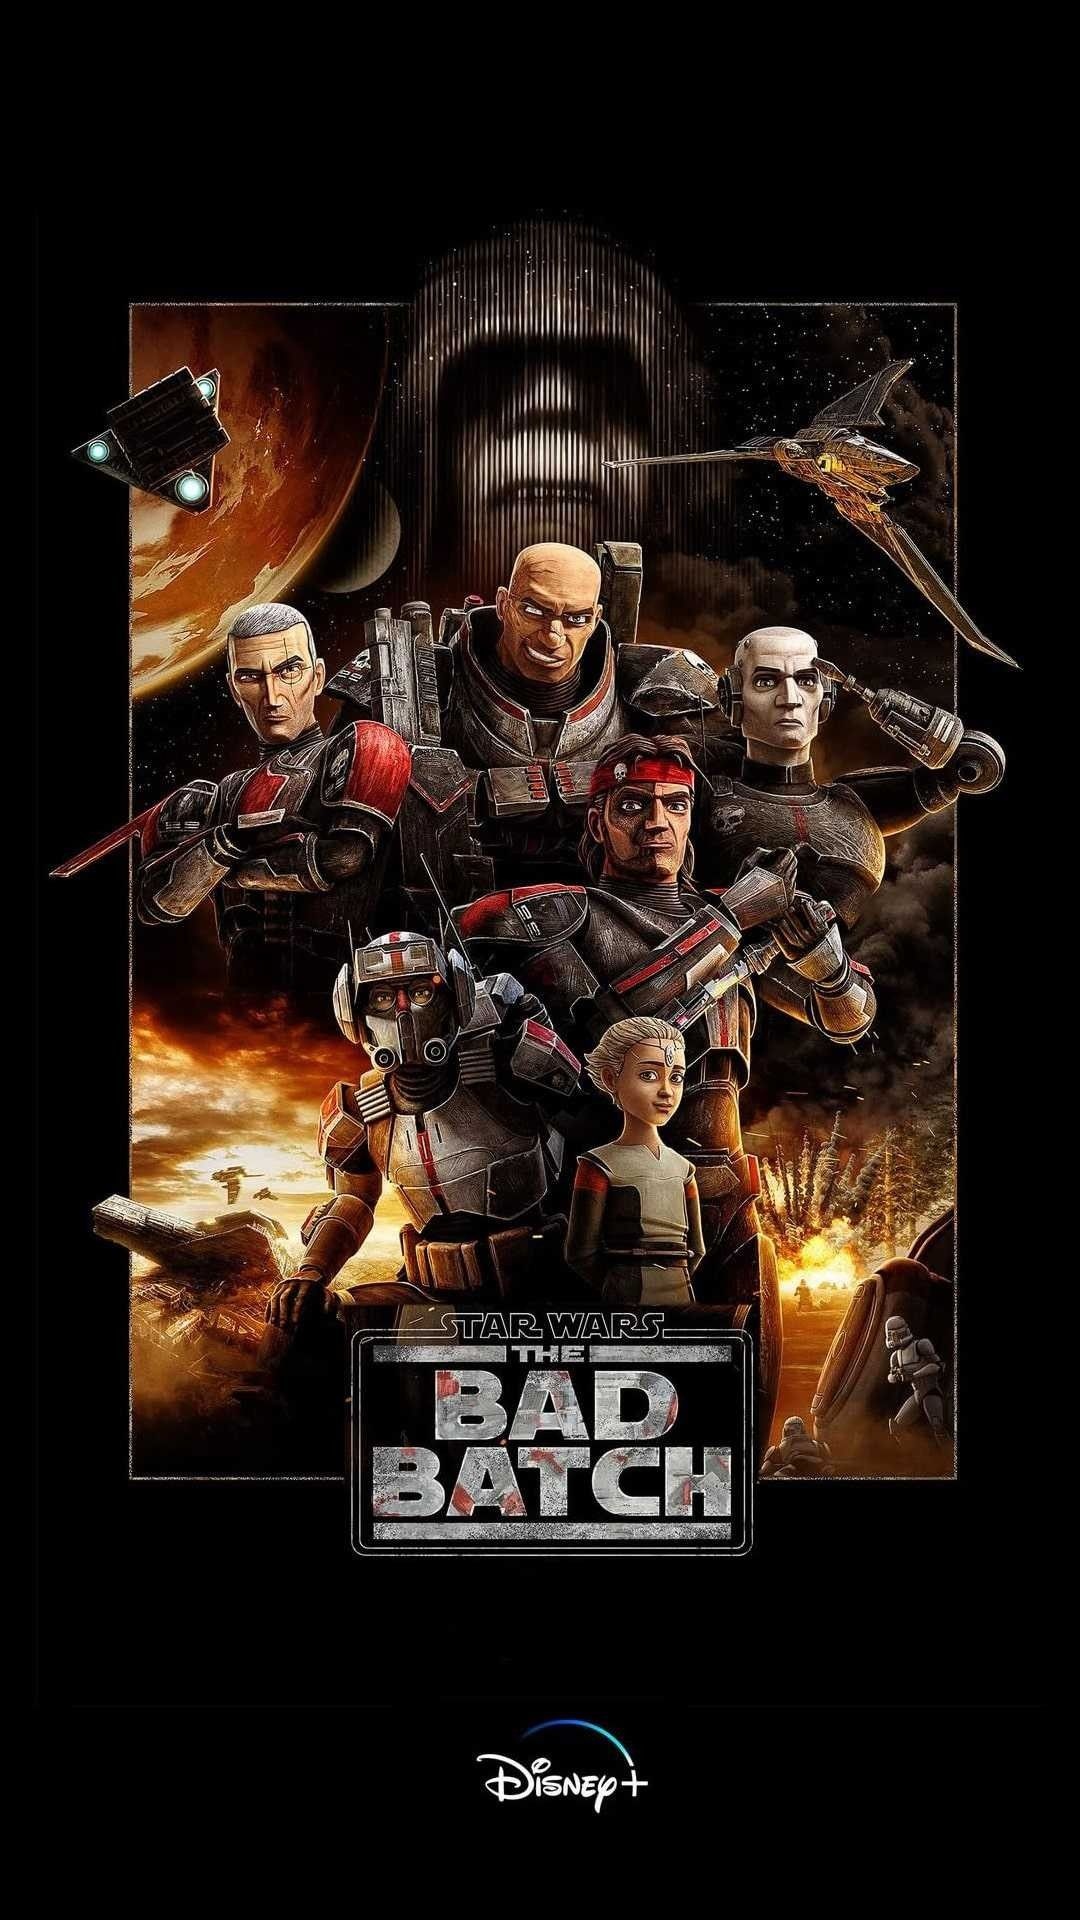 Star Wars: The Bad Batch: An animated television series, A sequel to The Clone Wars, Disney+. 1080x1920 Full HD Wallpaper.